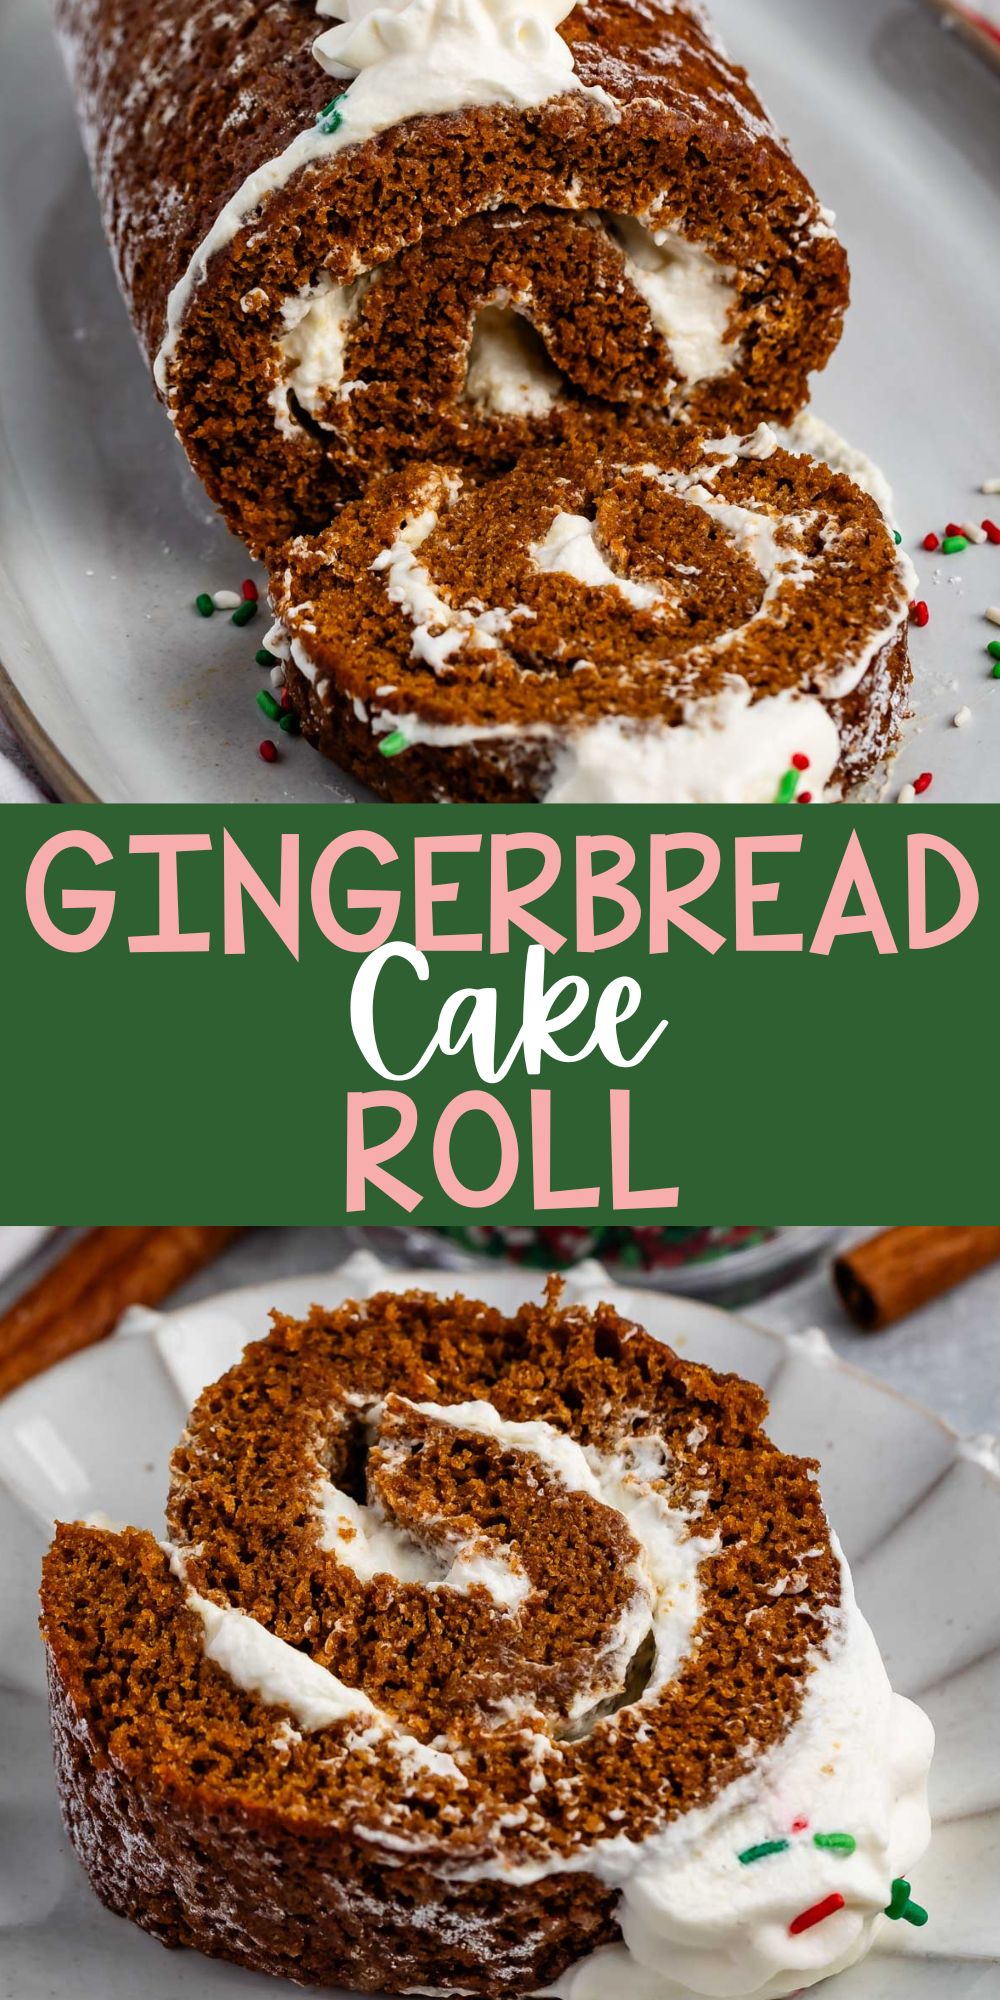 two photos of sliced gingerbread cake roll with whipped cream and sprinkles on top on a grey plate with words on the image.